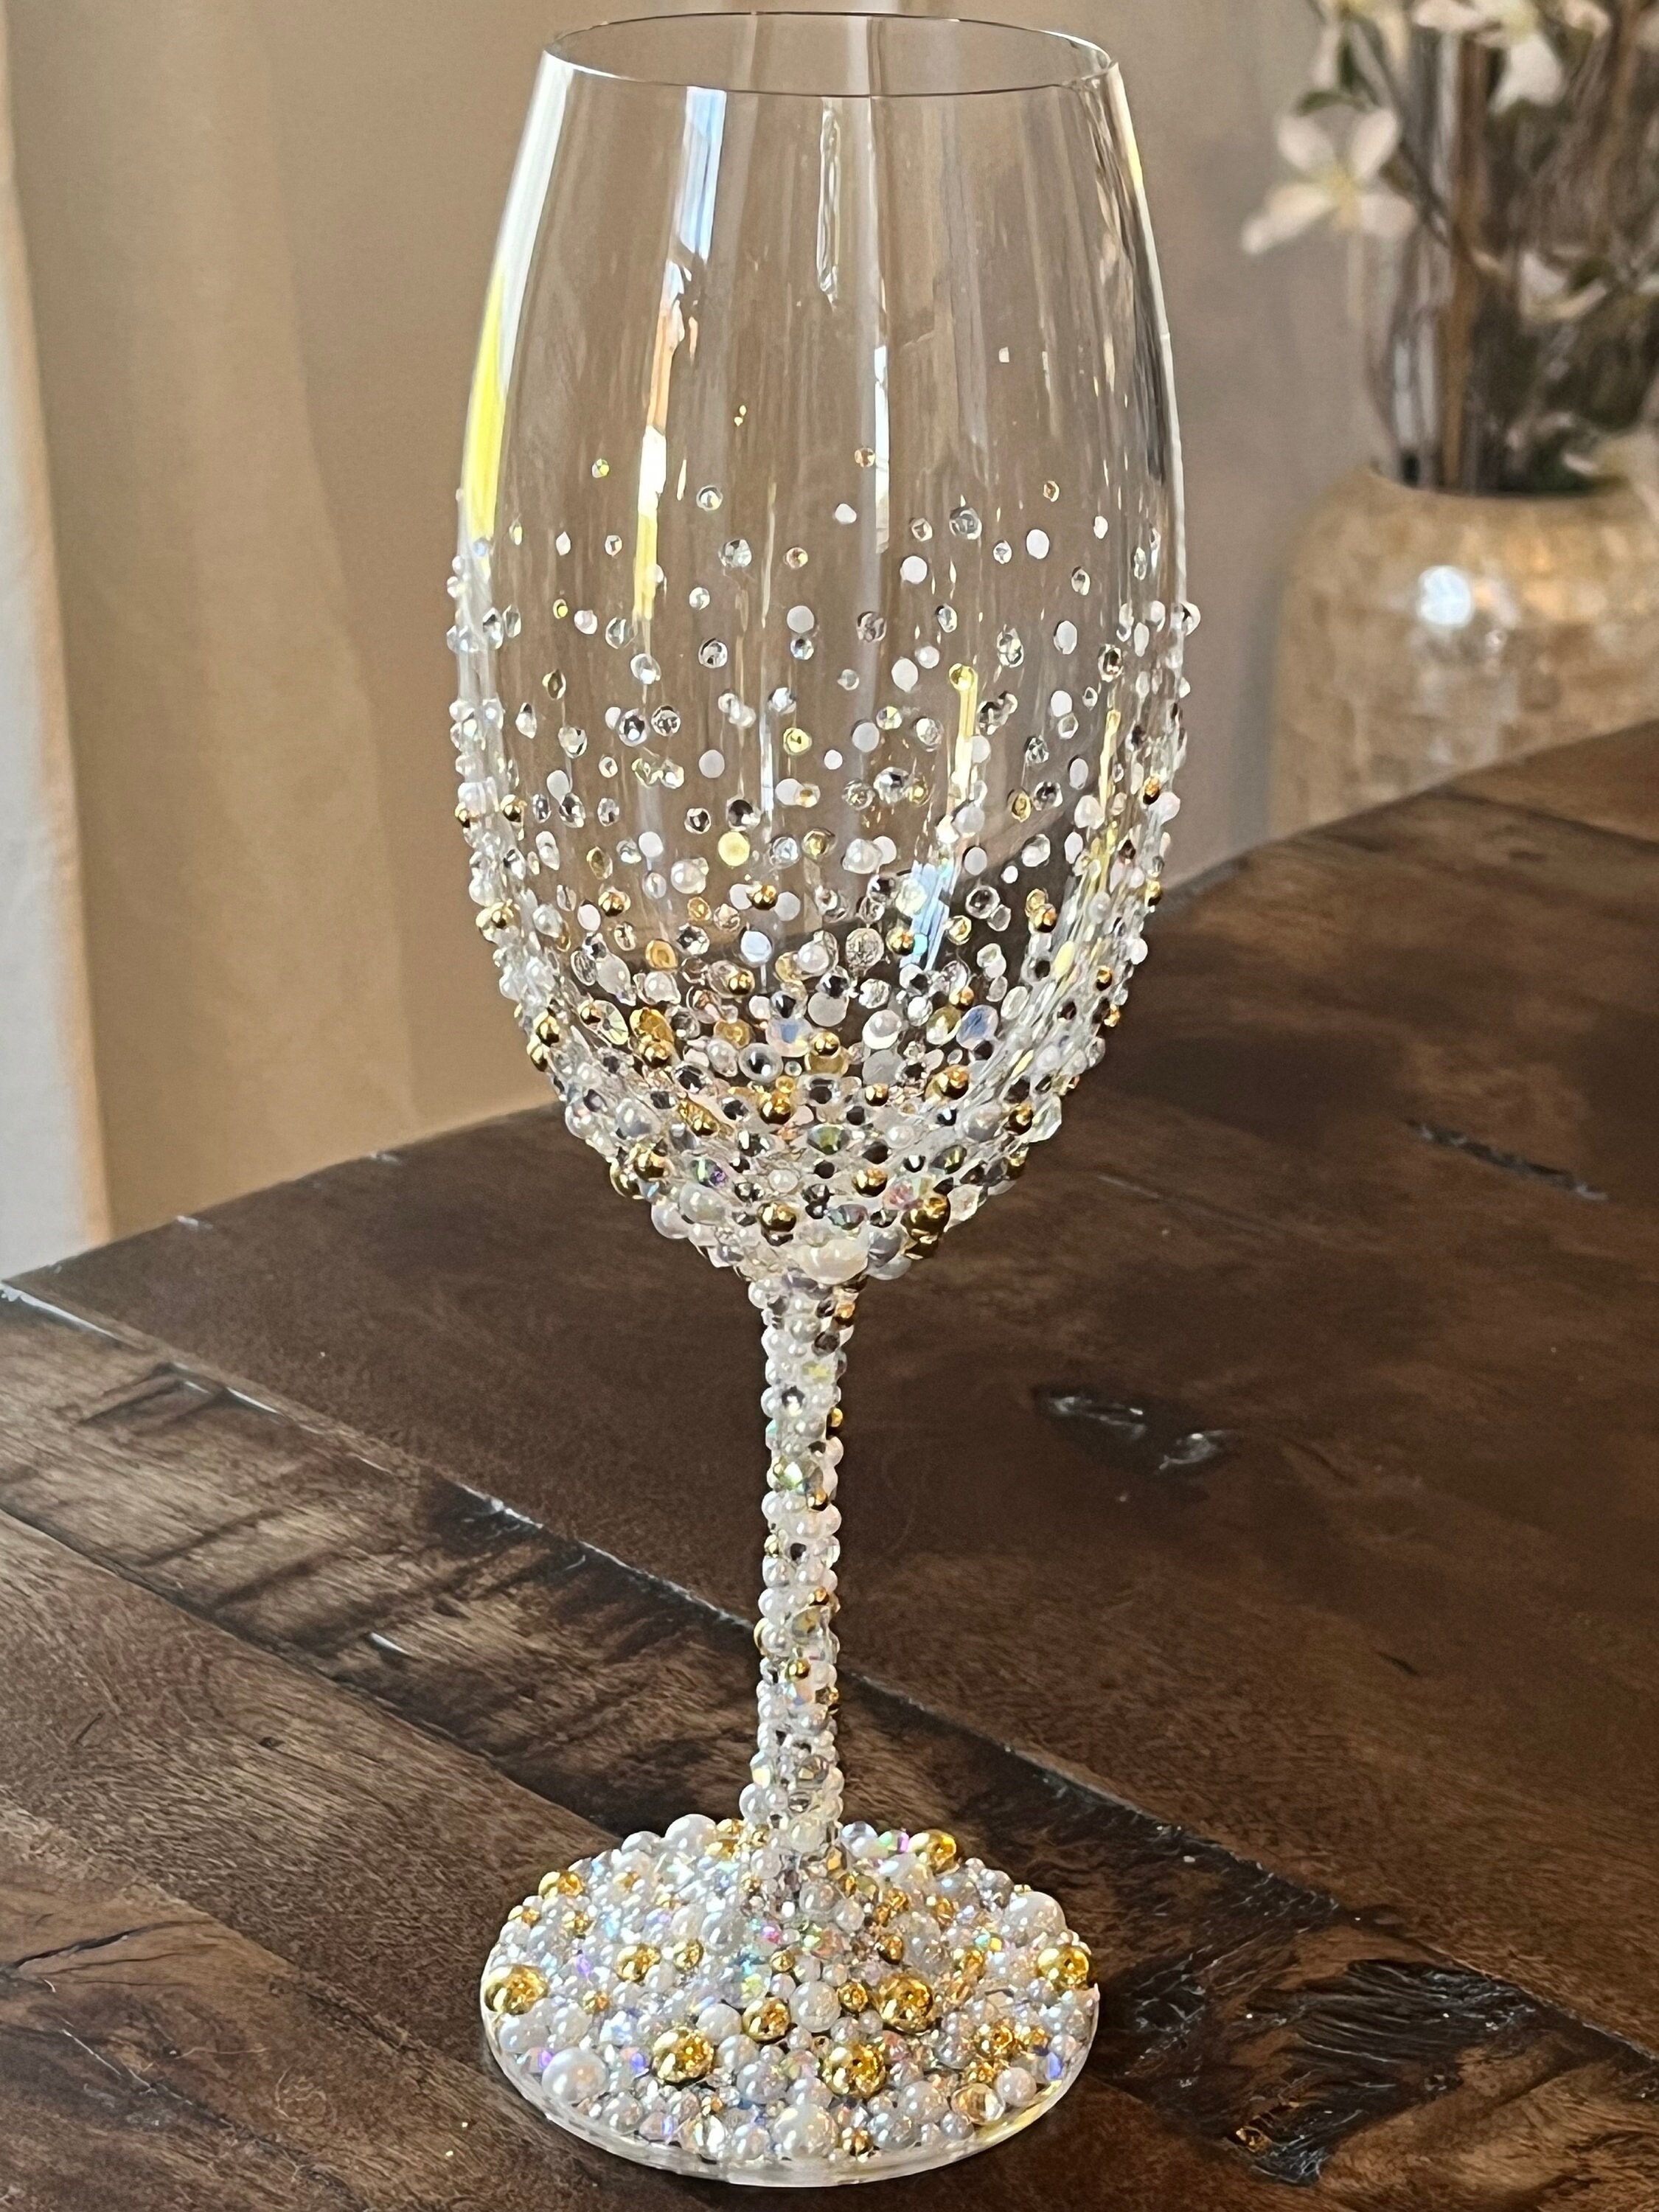 Women Pearl and Rhinestone Stemmed Wine Glasses - Back to the South Bling